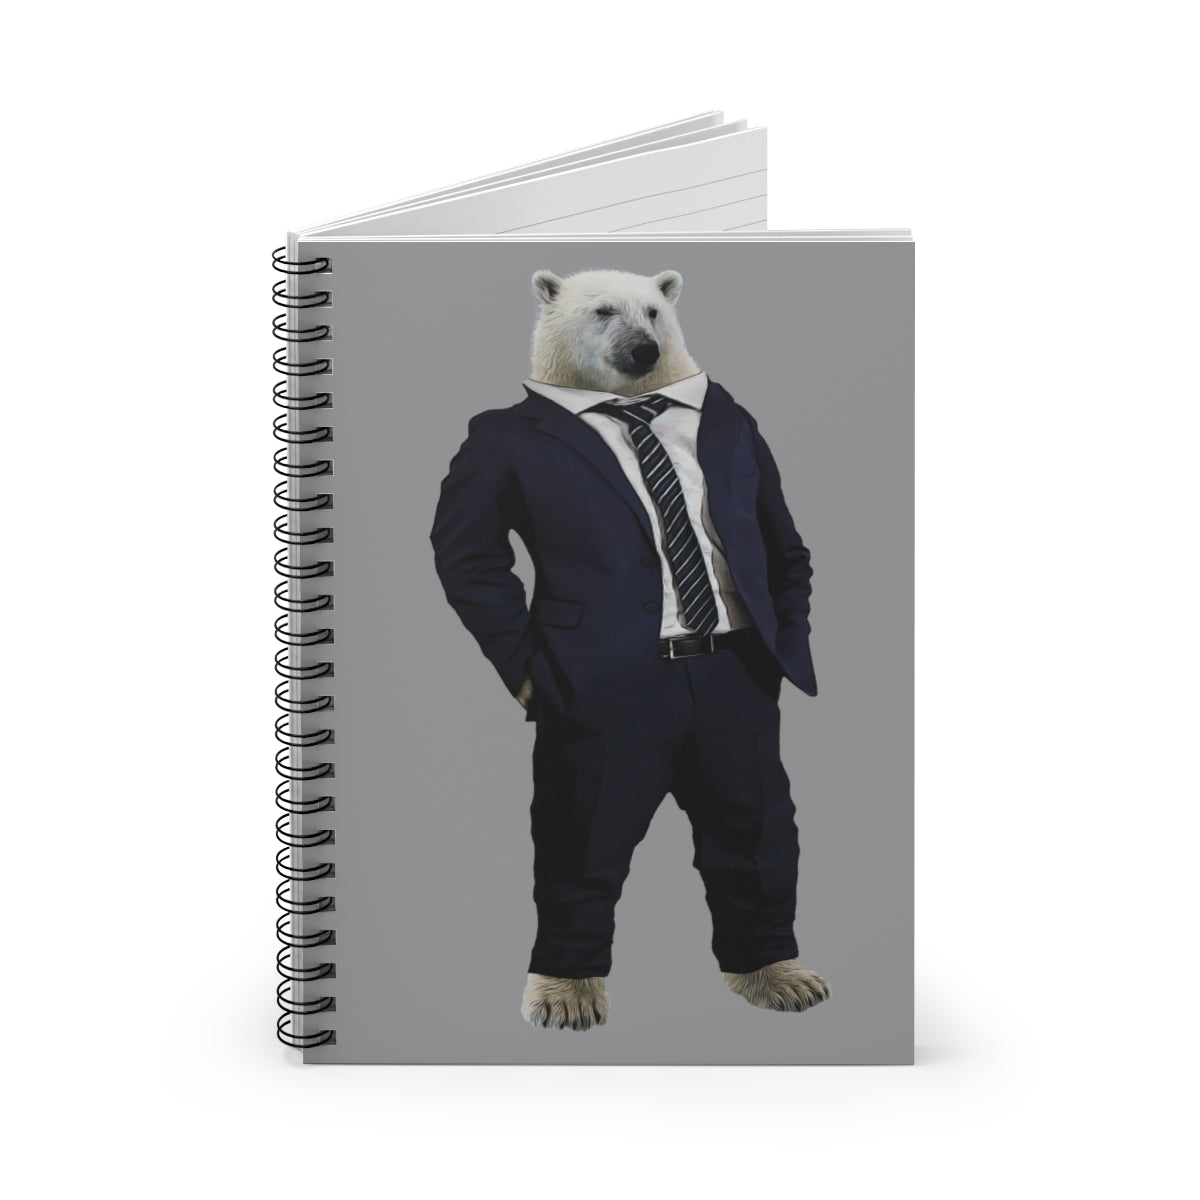 Don't Ask Me Why! Polar bear in a suit -Spiral Notebook - Ruled LineBrainStorm Tees